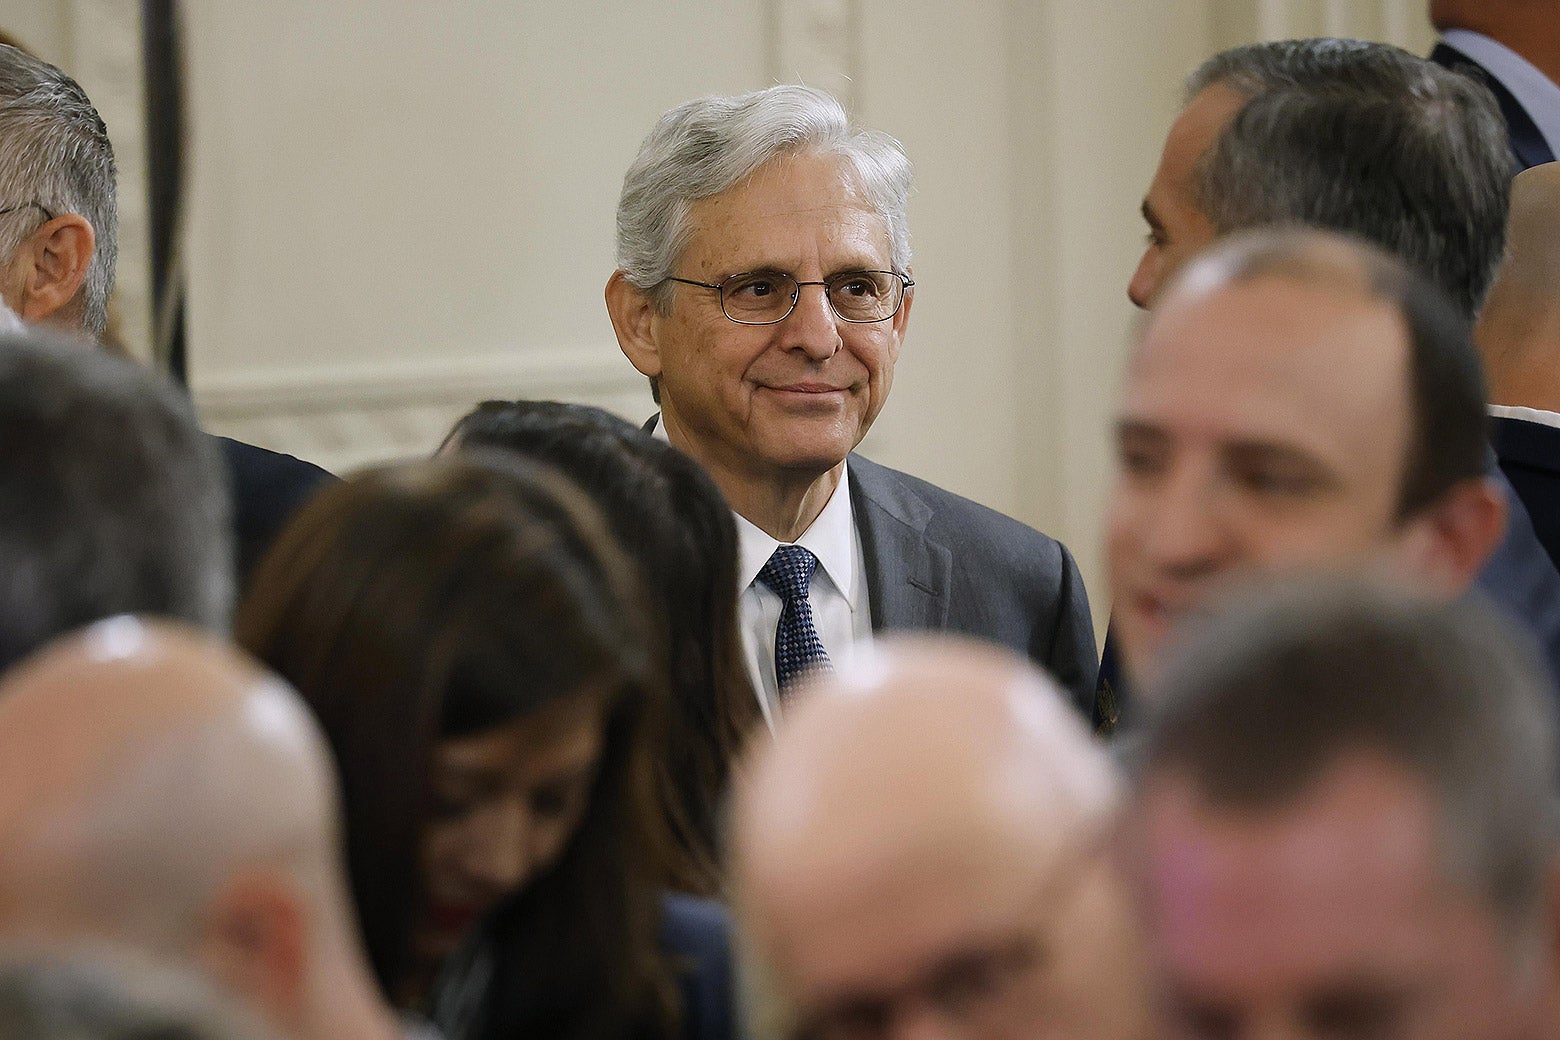 Merrick Garland grinning in a crowd of blurred faces.